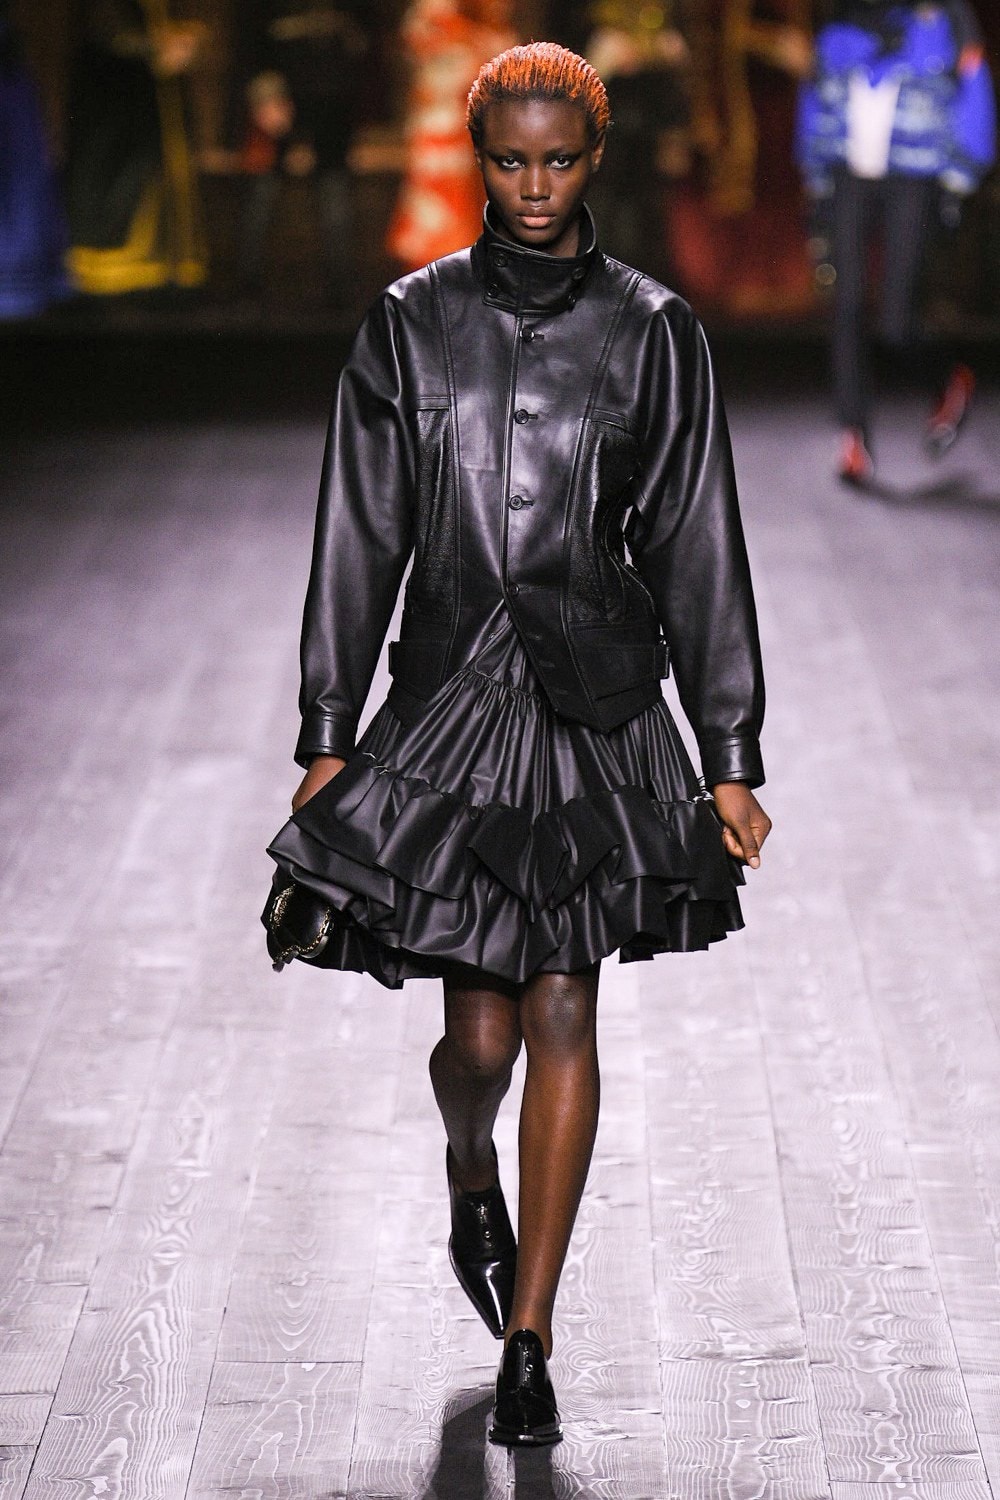 Louis Vuitton Fall/Winter Collection Runway Show Leather Jacket Ruffle Skirt Black